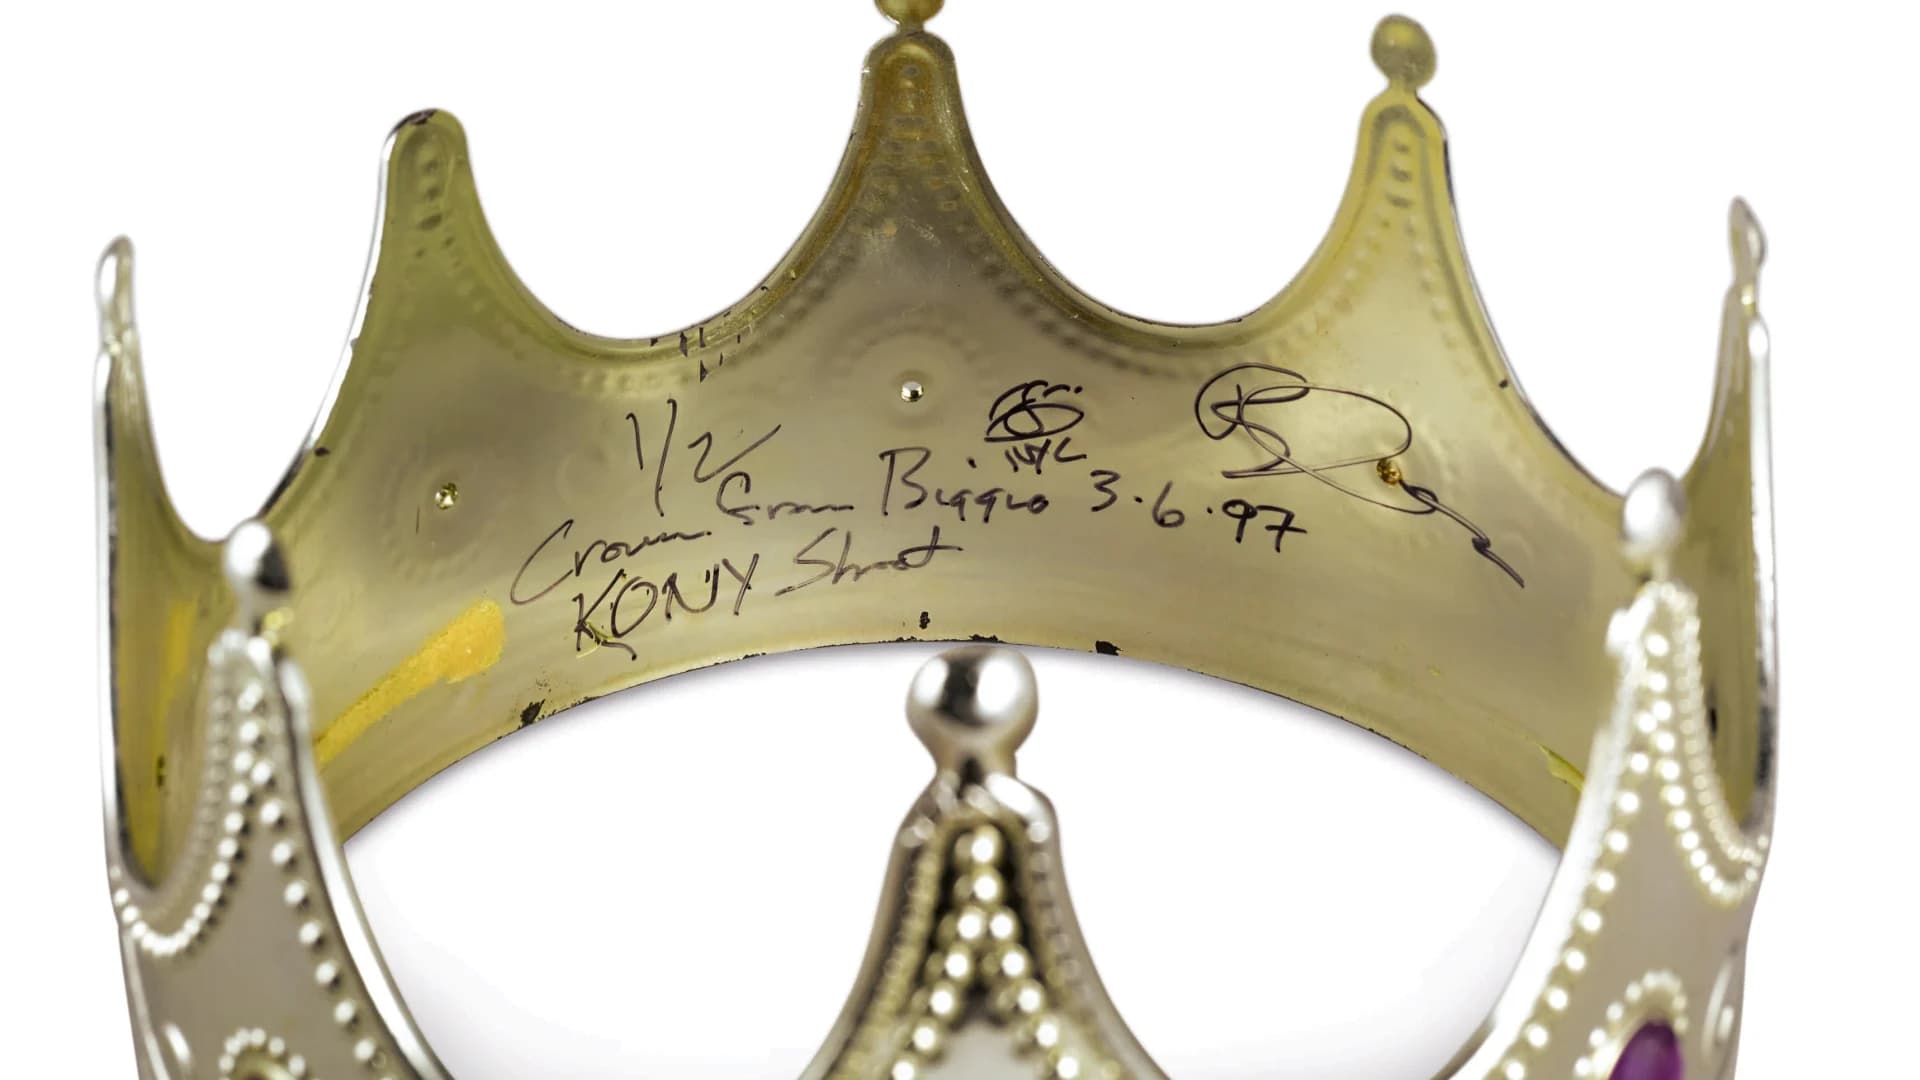 Sotheby’s to host 1st ever hip-hop auction, featuring items from Tupac and Notorious B.I.G.